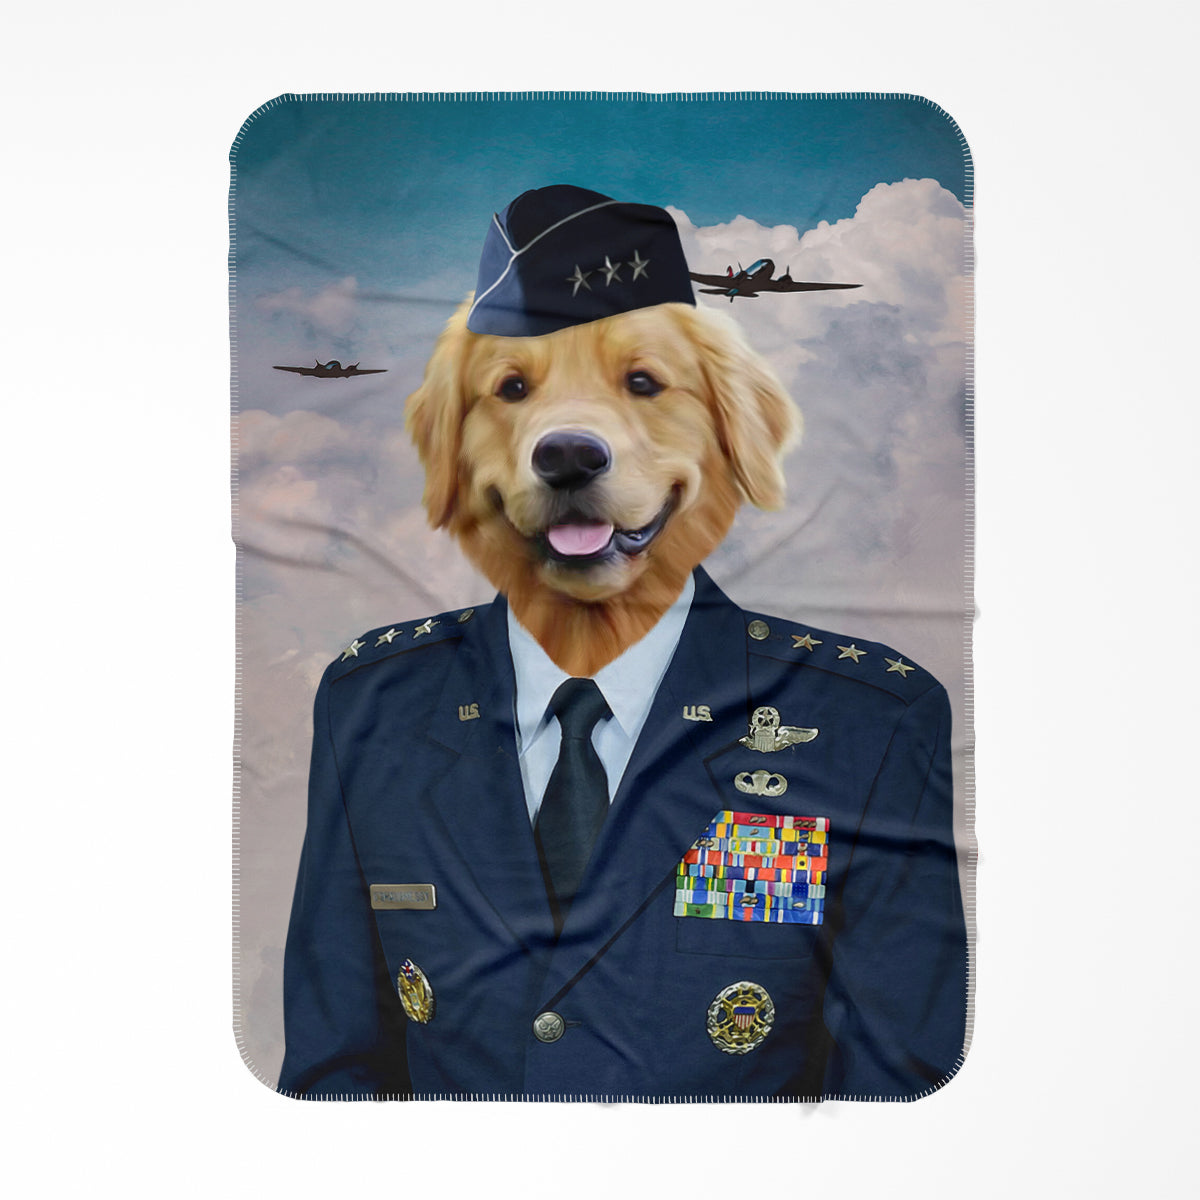 The US Male Airforce Officer Paw & Glory, pawandglory, Pet Portraits blanket, pet picture on blanket, custom pet blanket, dog photo blanket, blanket with dog on it, dog on blanket, best pet photo blanket